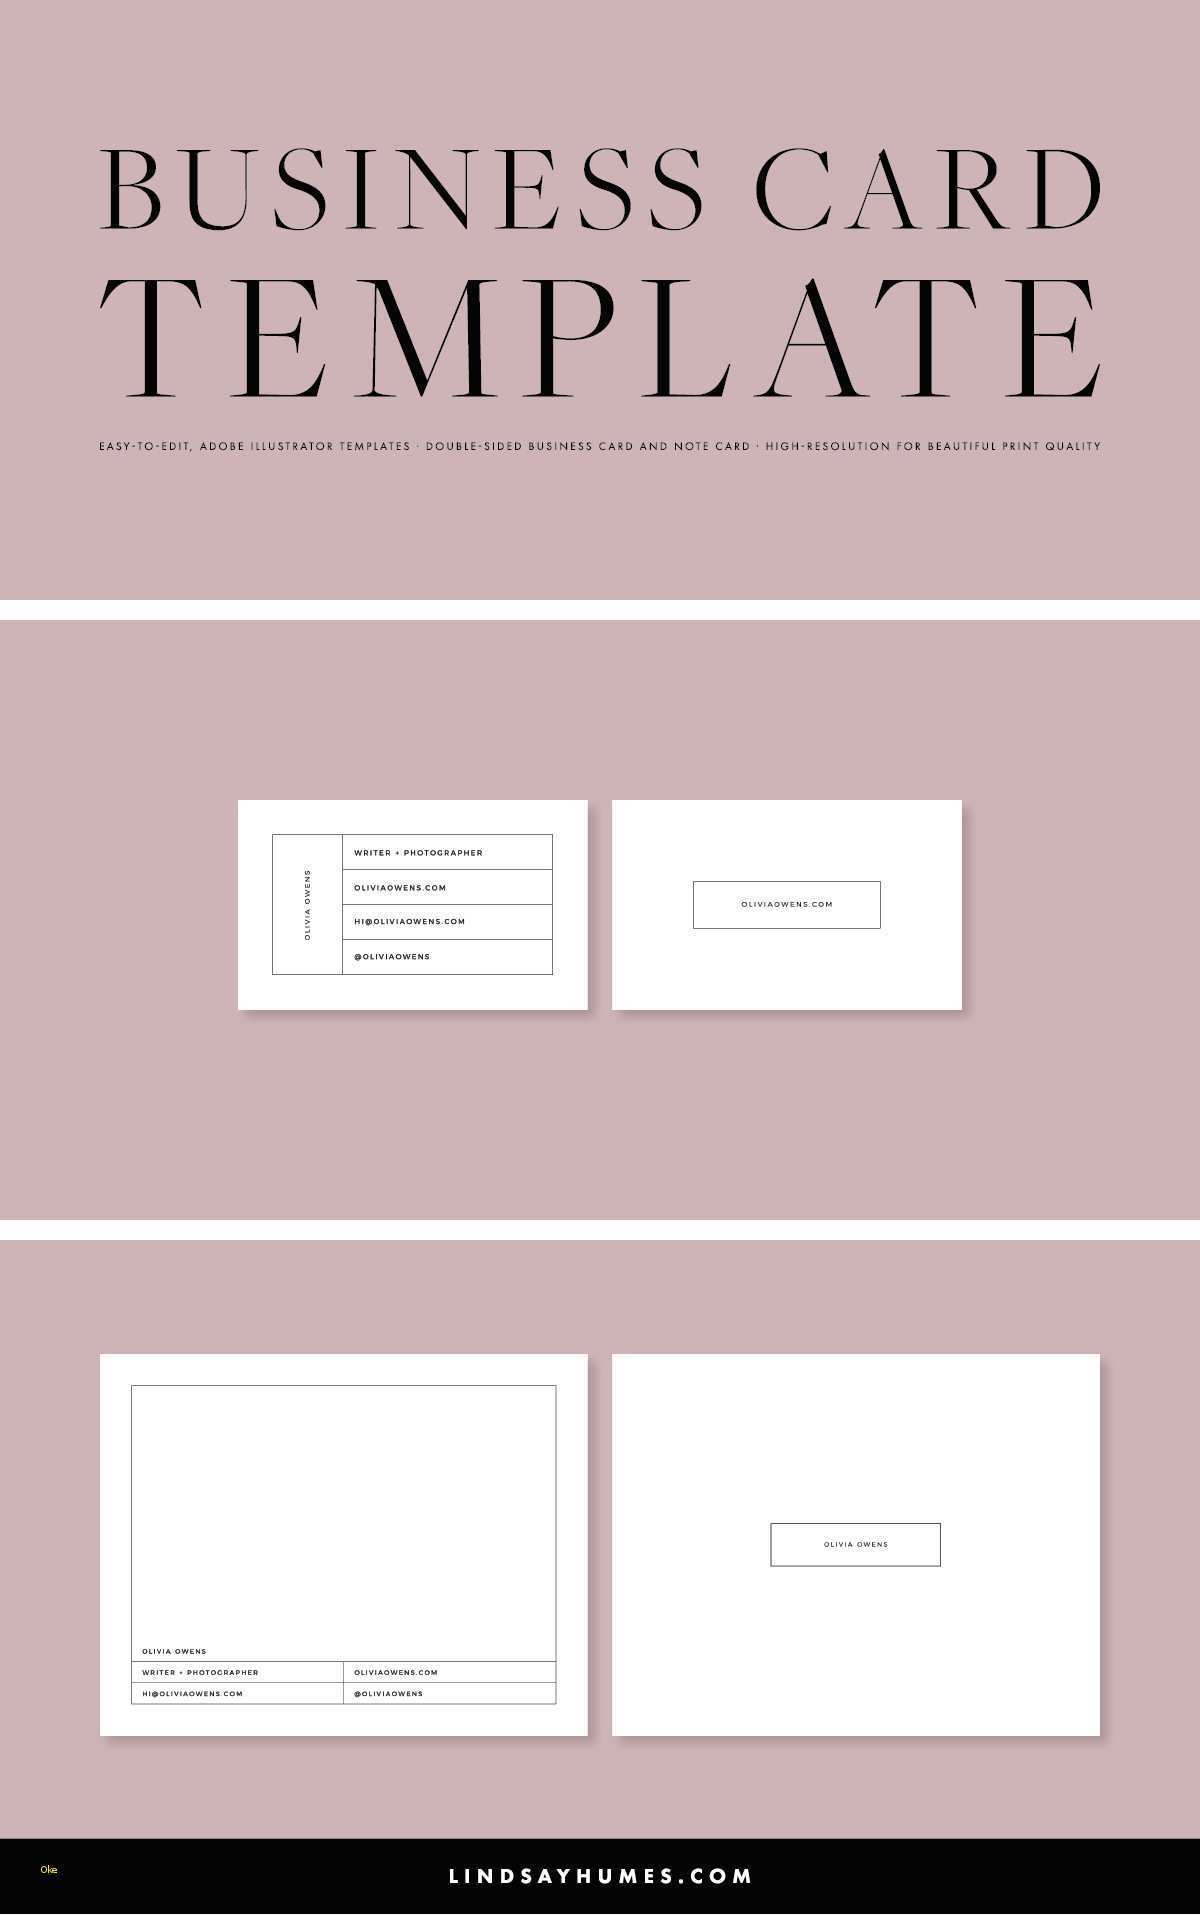 67 Customize Business Card Size Template Illustrator Free Download in Word with Business Card Size Template Illustrator Free Download